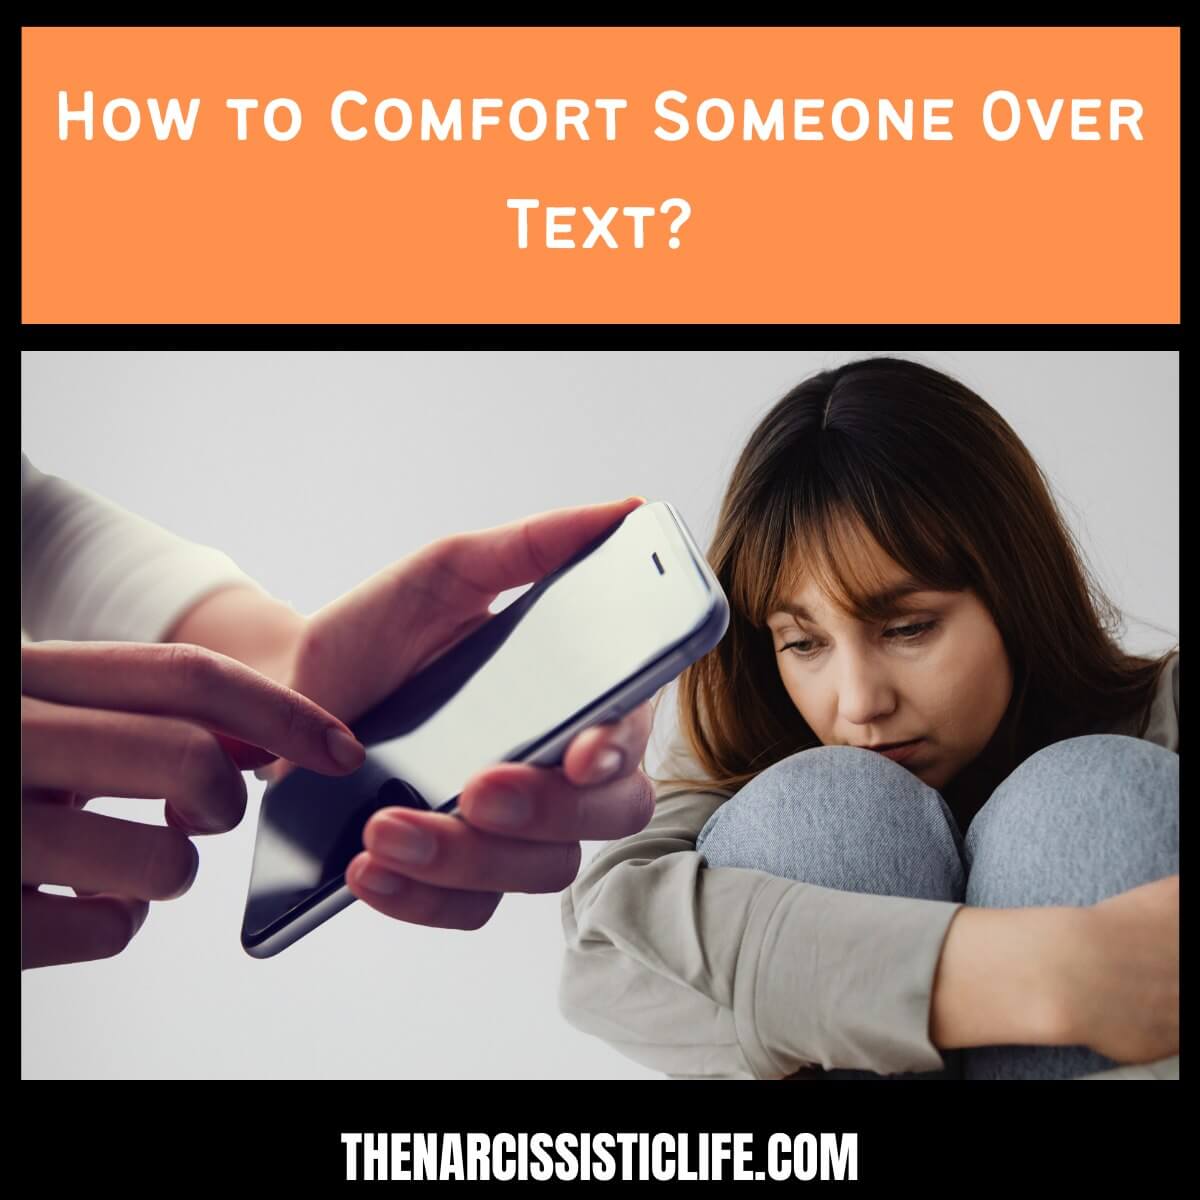 How to Comfort Someone Over Text